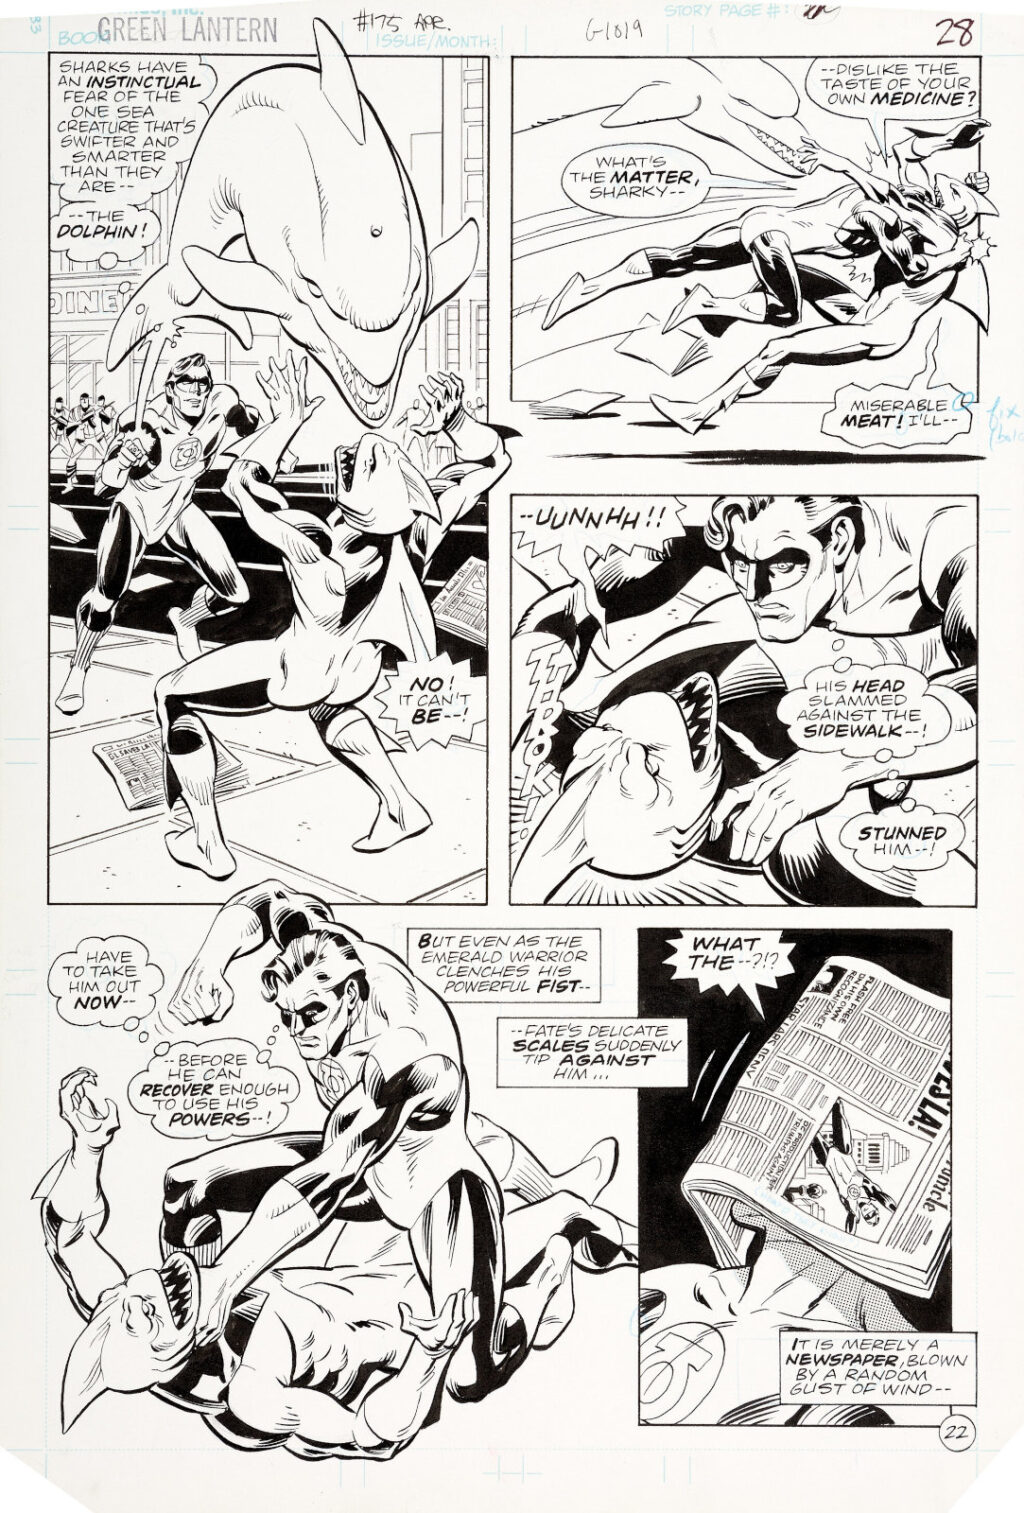 Green Lantern issue 175 page 28 by Dave Gibbons